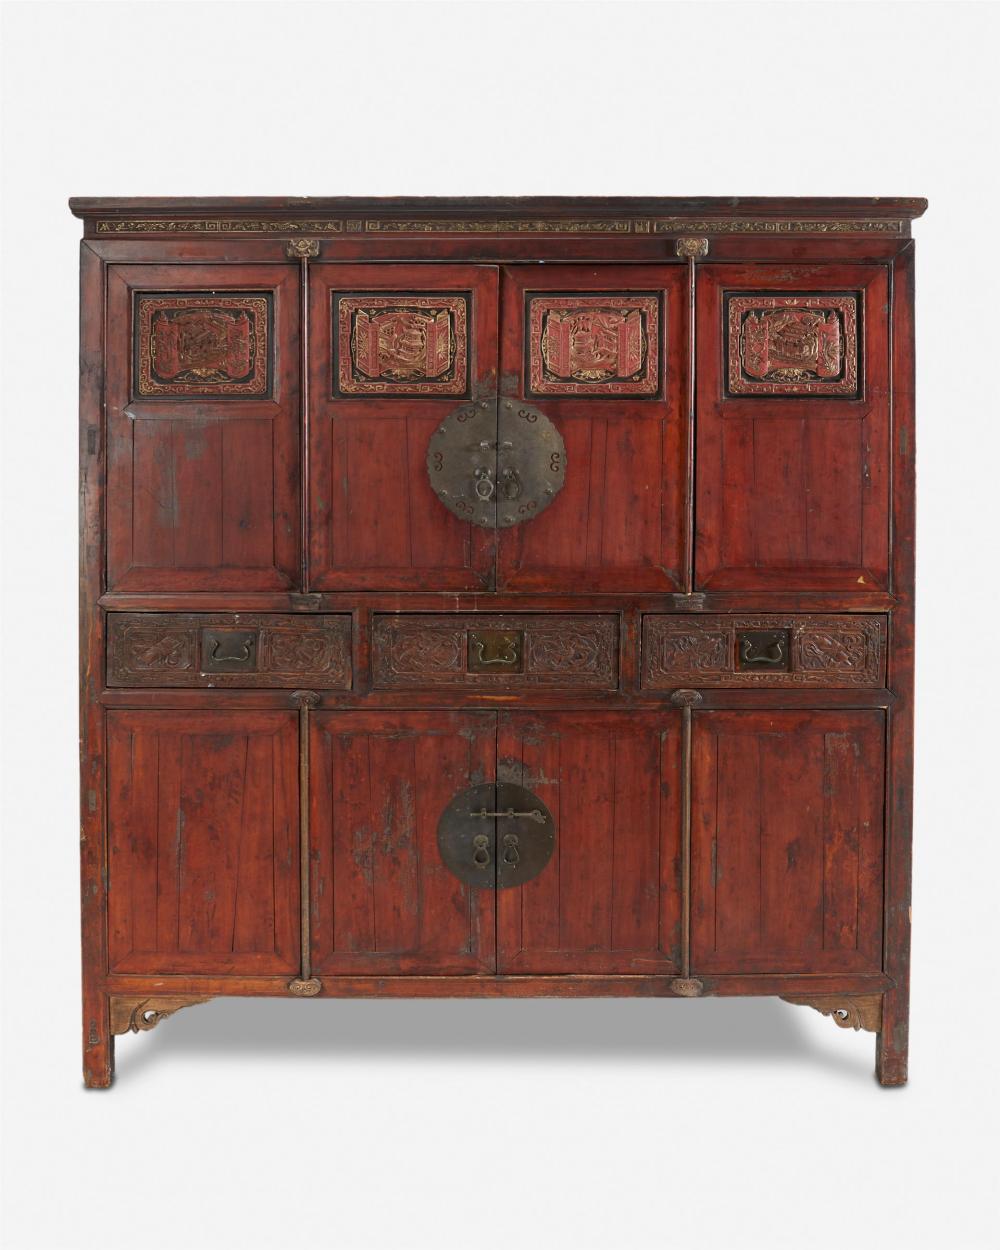 A CHINESE CARVED WOOD CABINETA 344e5d